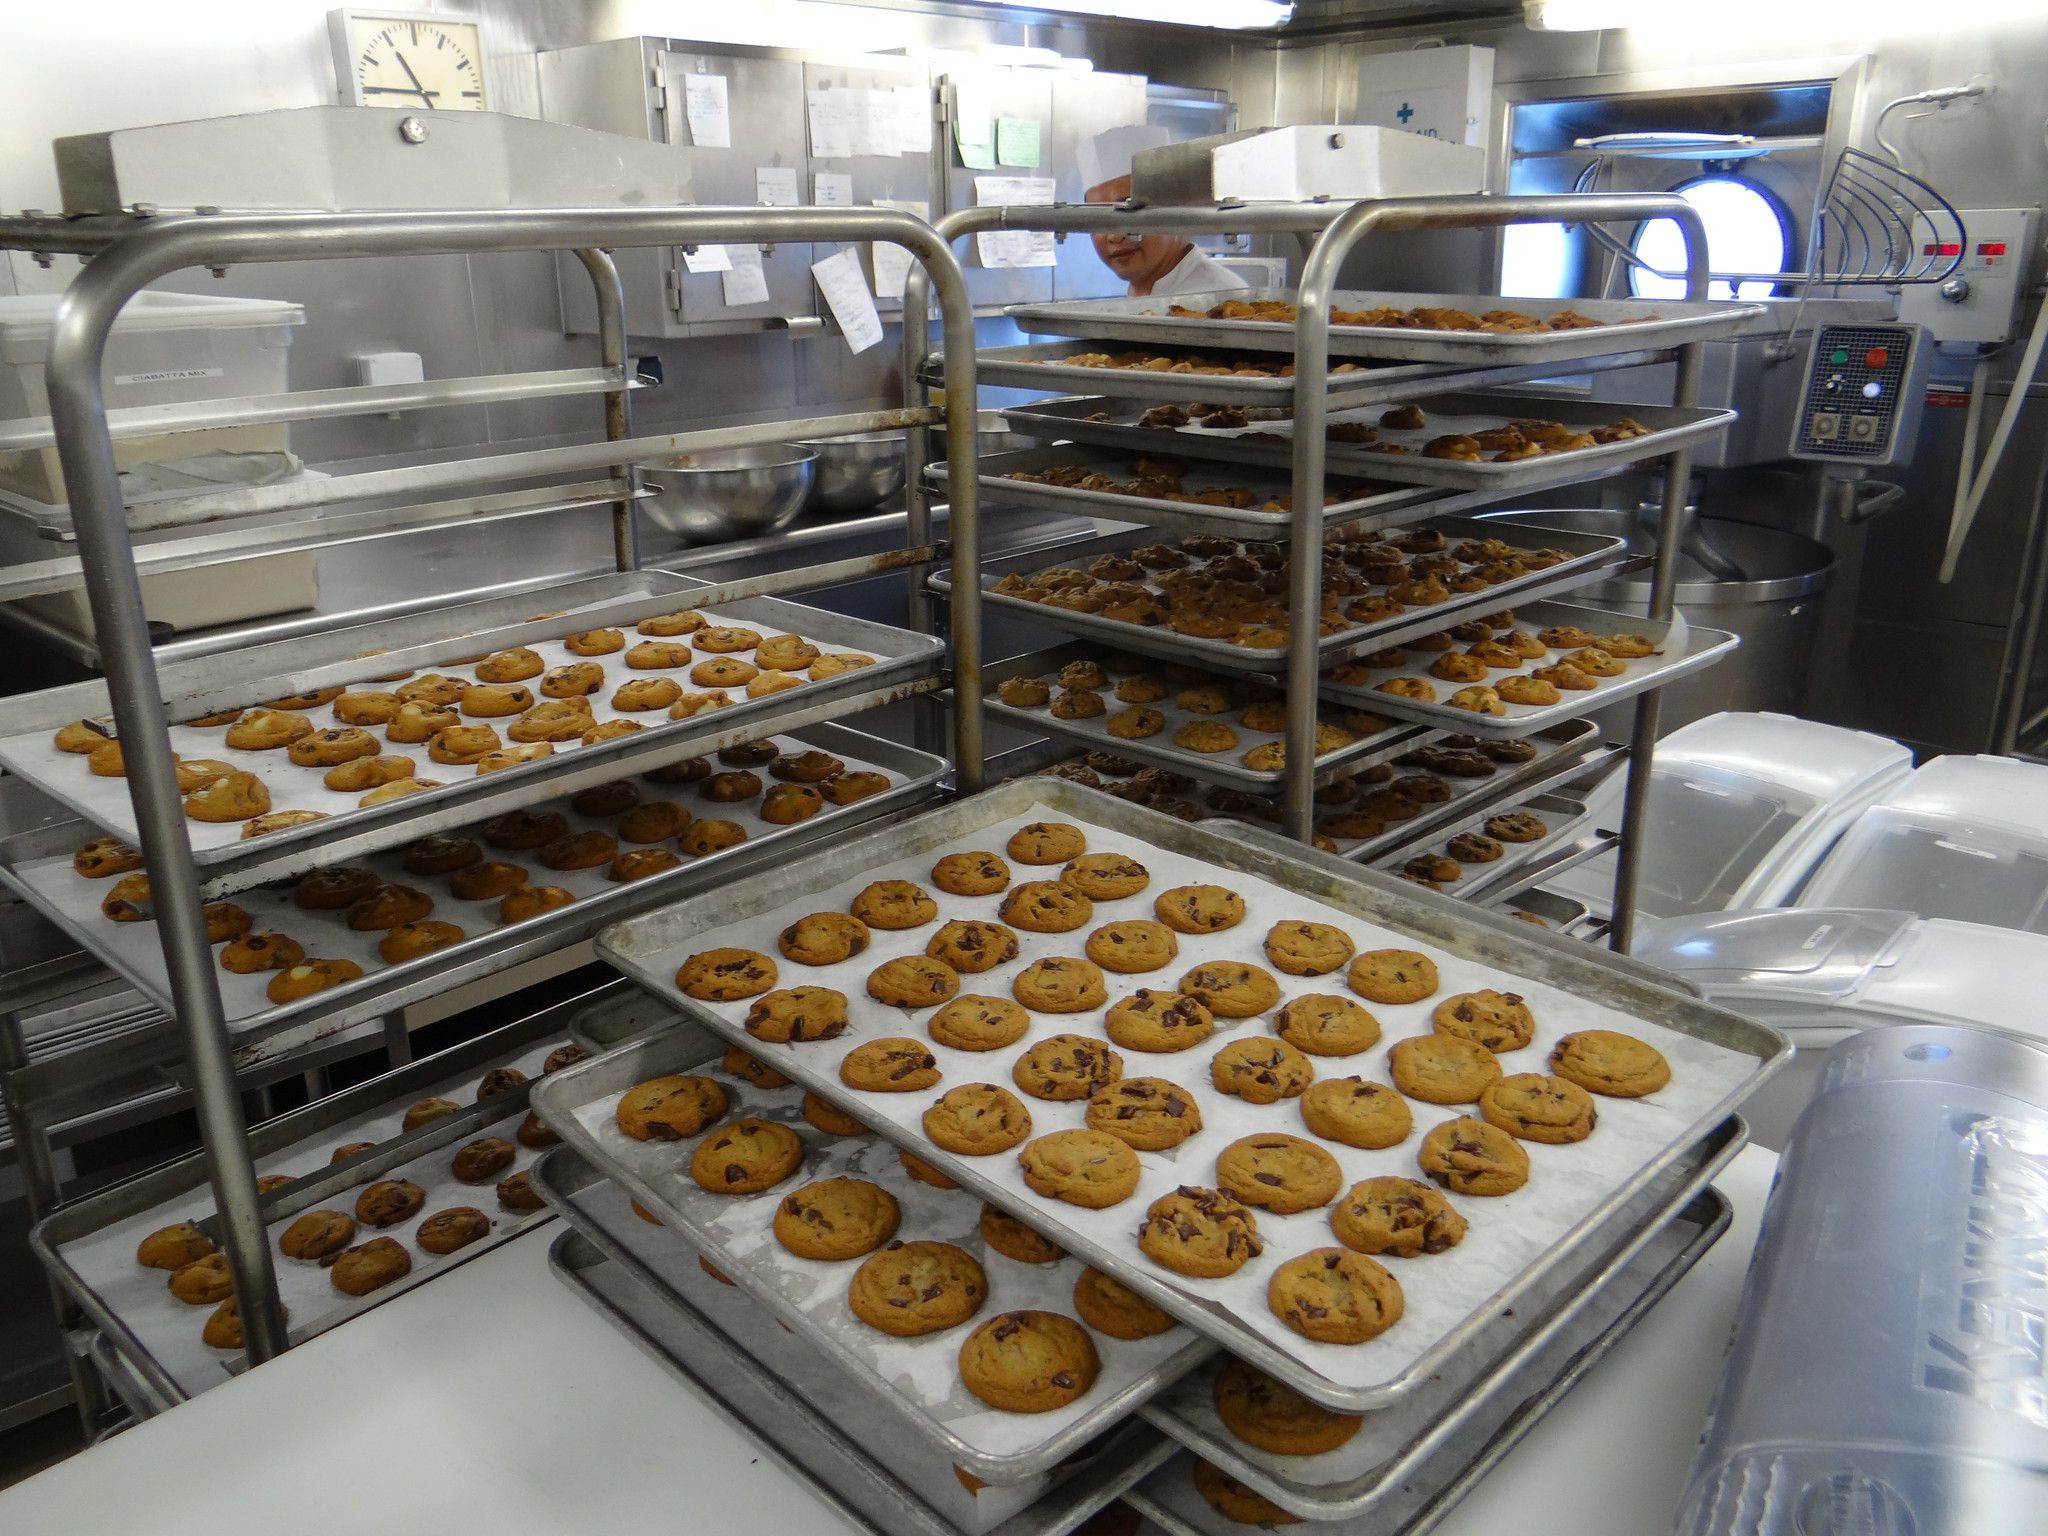 <p>Massive cruise ship kitchens need to prepare thousands of plates every day, so they stock up with <a href="https://www.insider.com/cruise-ship-kitchen-facts-2019-1#the-kitchens-are-extra-enormous-1">huge amounts of food</a>. A ship with 3,500 passengers will go through 600 pounds of butter each day, as well as 250,000 eggs per week. The ship will also use 170,000 pounds of fresh fruits and vegetables during each cruise. </p><b>Related: </b><a href="https://blog.cheapism.com/cruise-perks/">The Craziest Cruise Ship Amenities</a>